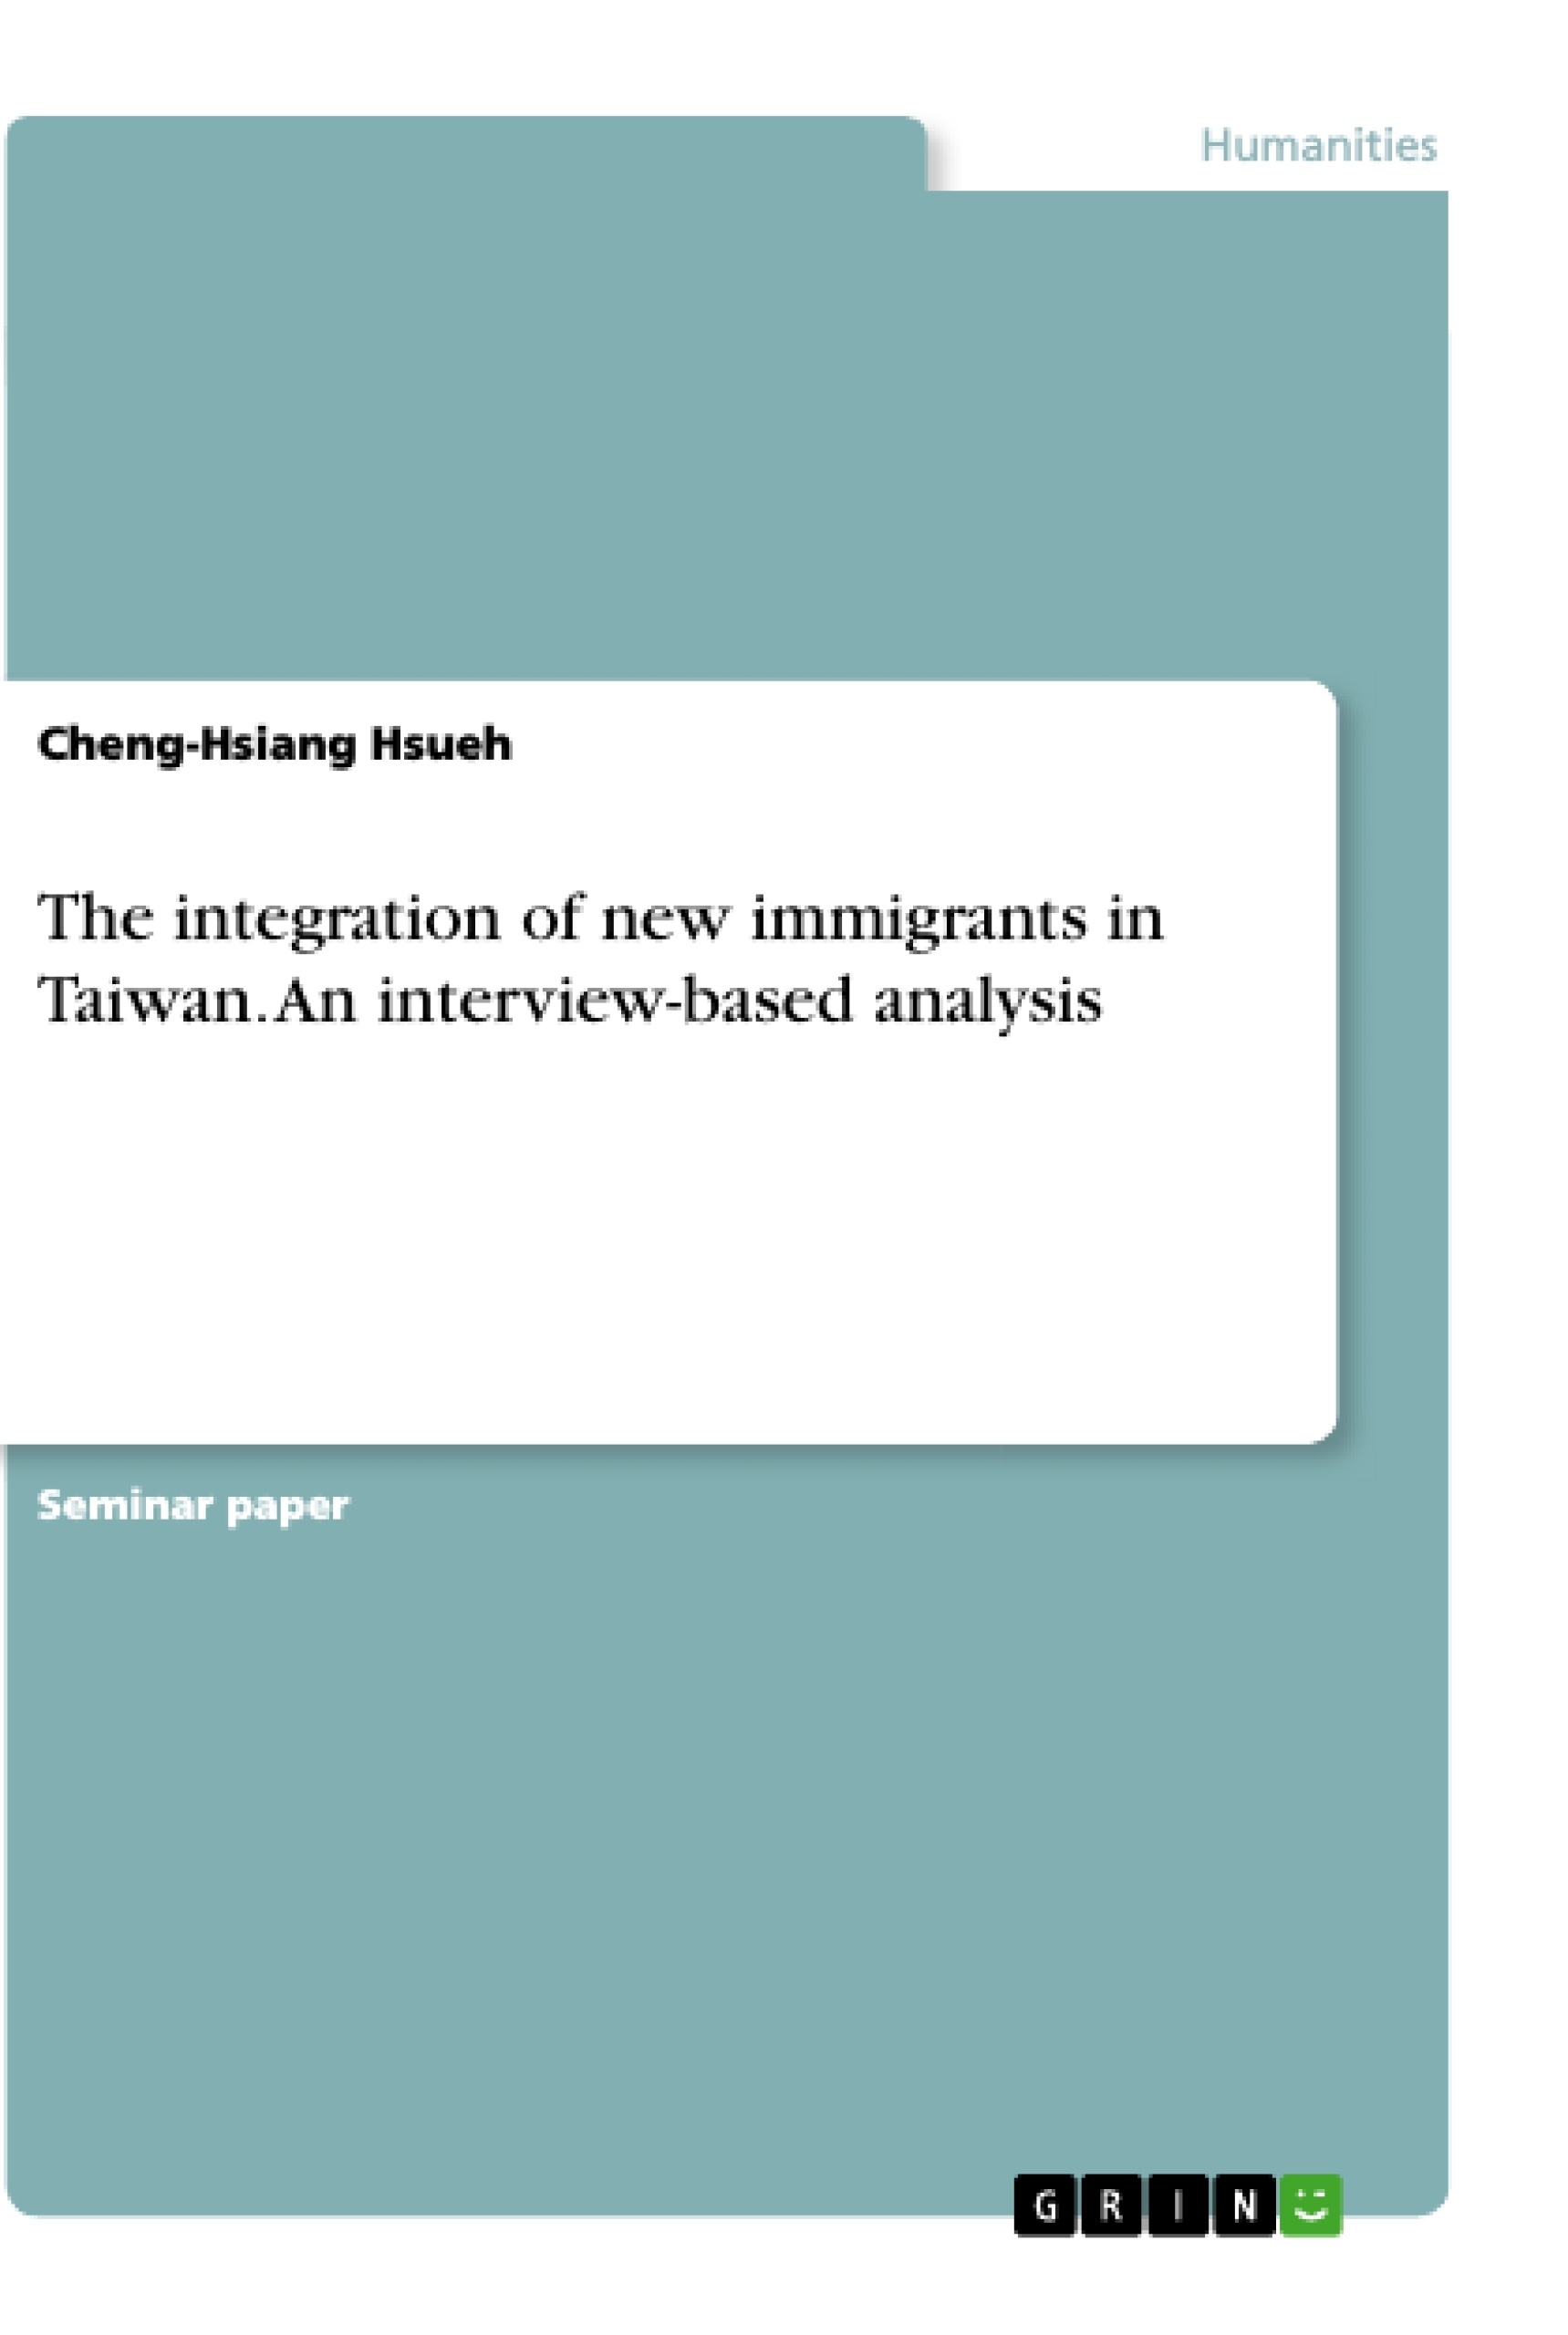 Title: The integration of new immigrants in Taiwan.  An interview-based analysis